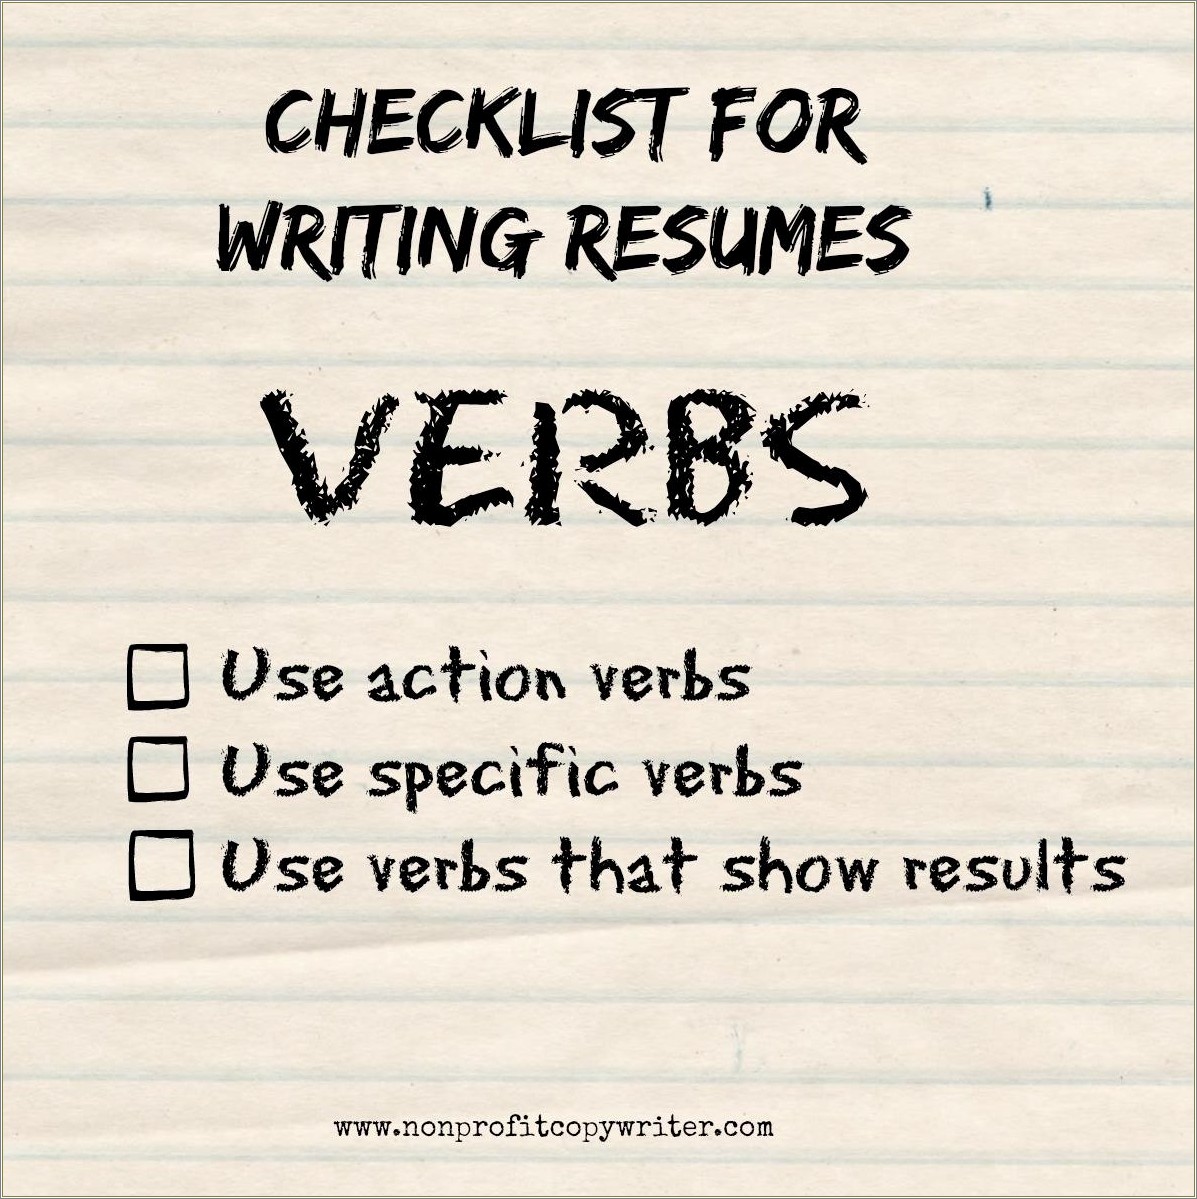 Action Words And Phrases For Resume